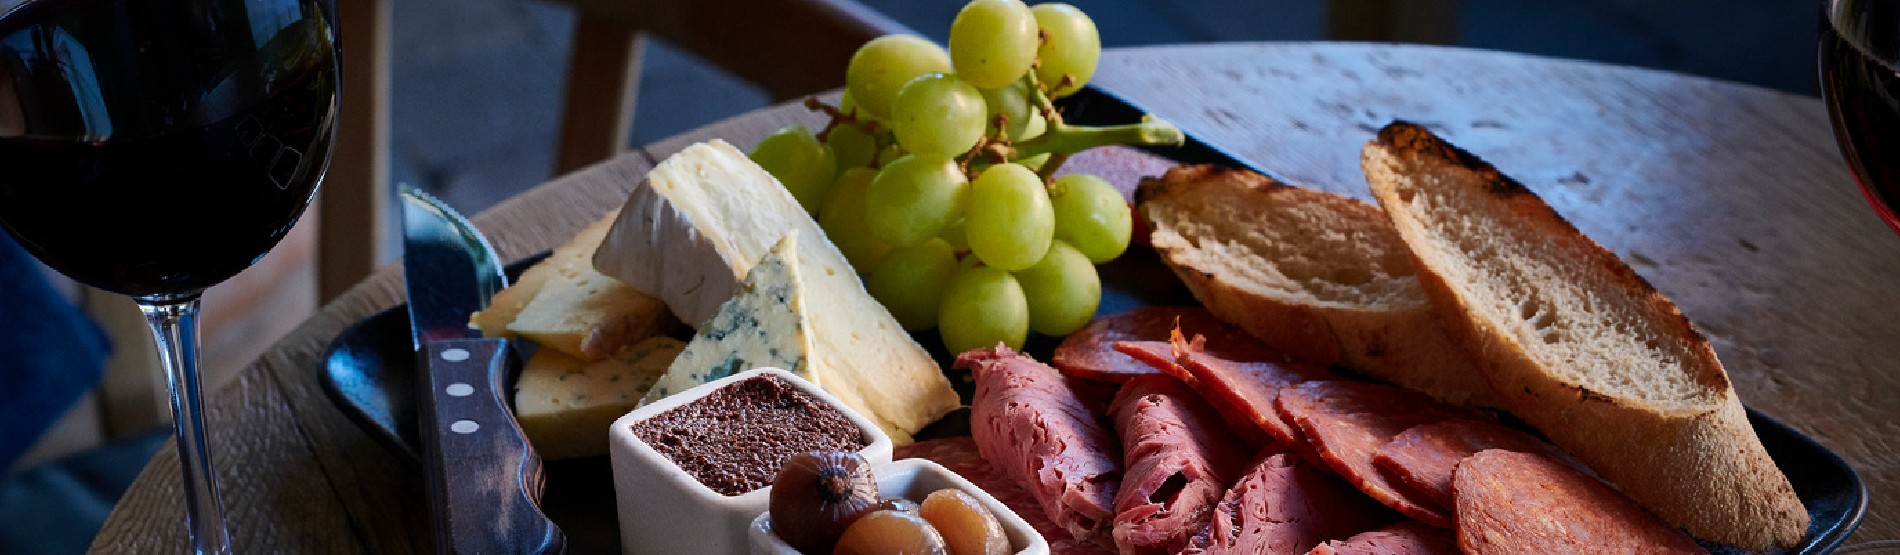 Sharing board with a selection of meat, cheese and bread and a glass of red wine